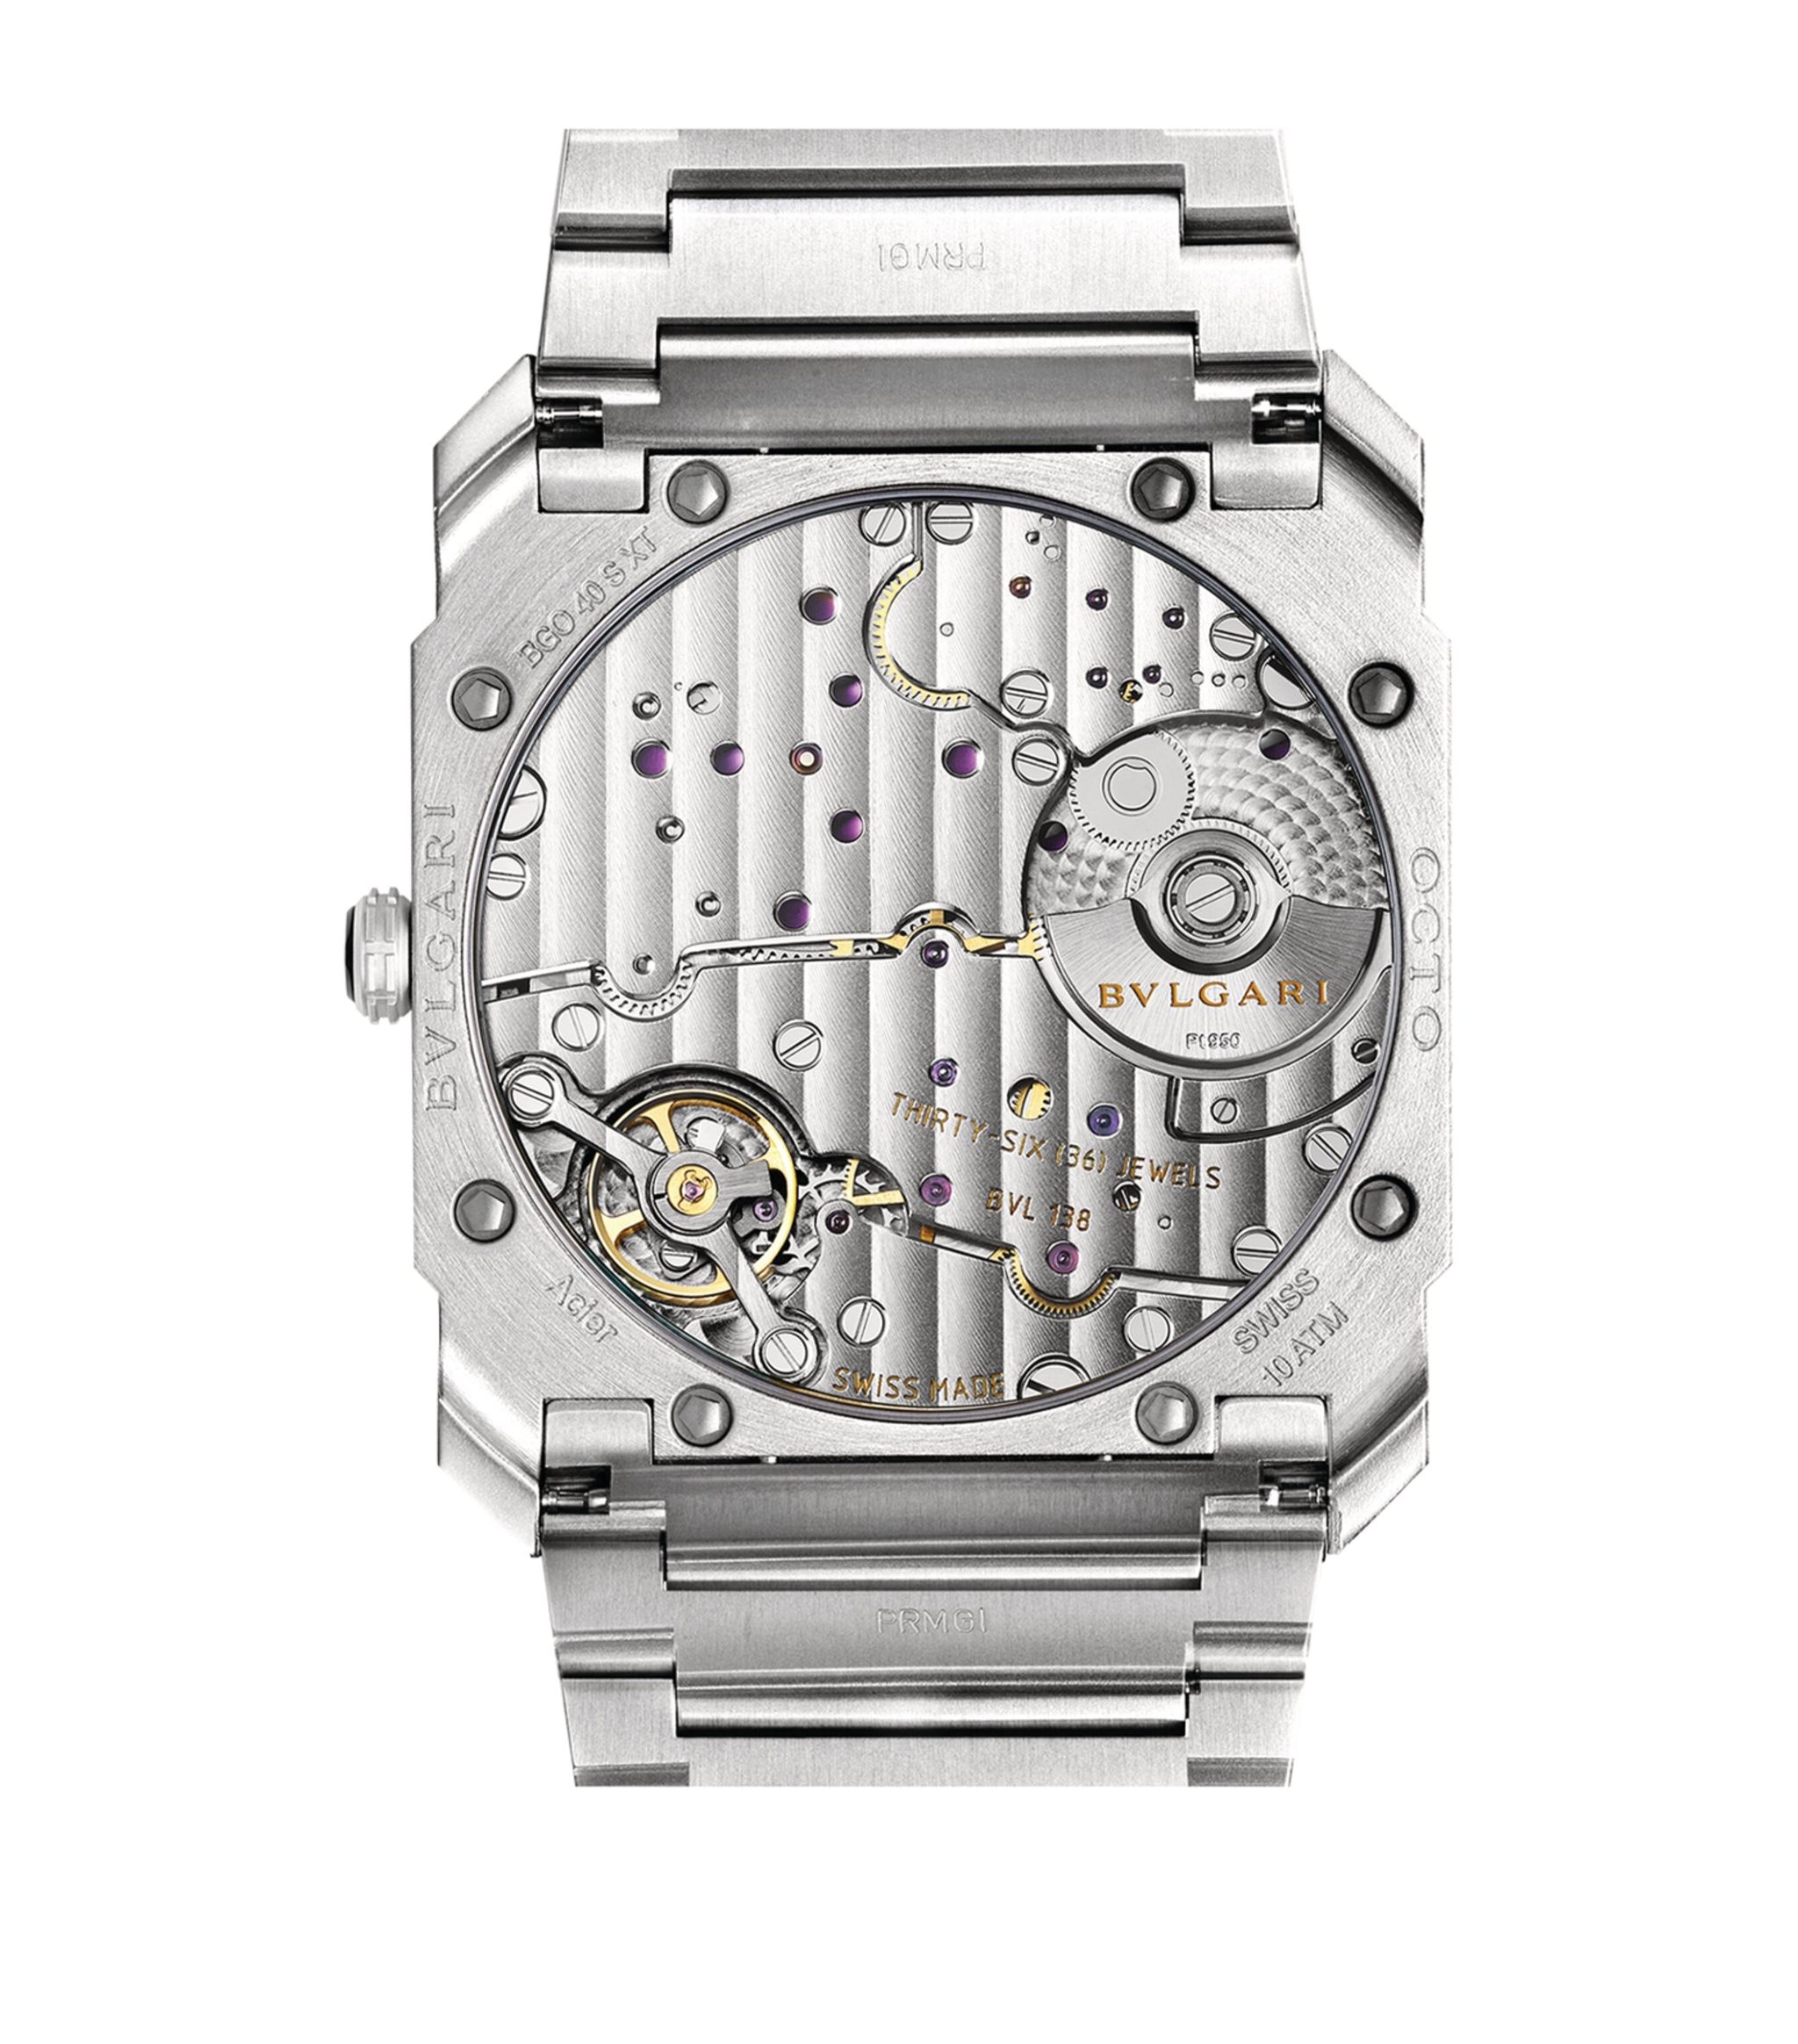 Đồng hồ BVLGARI Stainless Steel Octo Finissimo Automatic mặt số màu xanh